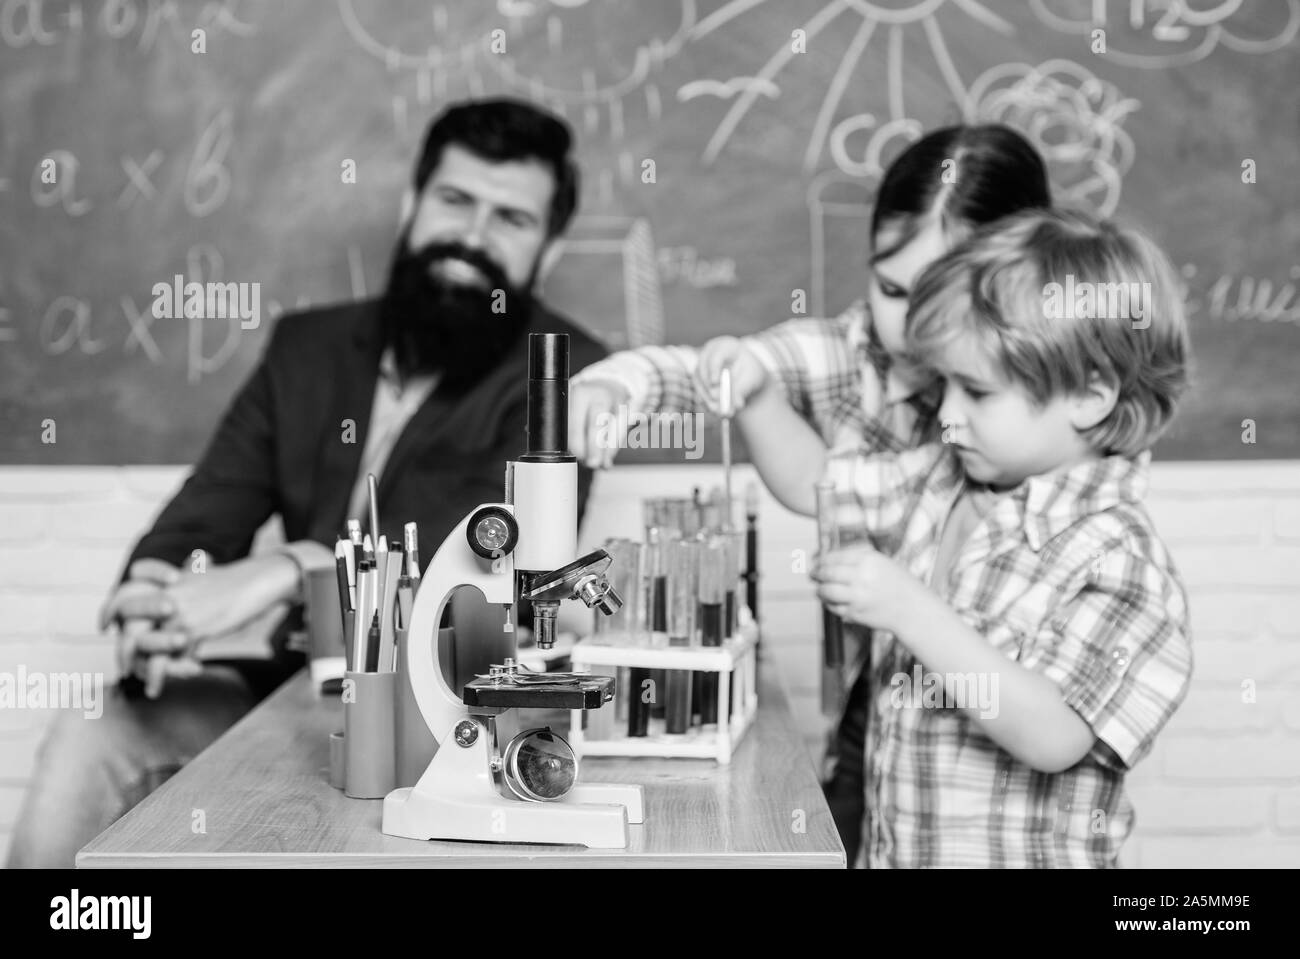 students doing science experiments with microscope in lab. back to school. school kids scientist study science. happy children. Little kids learning chemistry in school laboratory. Discovering cure. Stock Photo